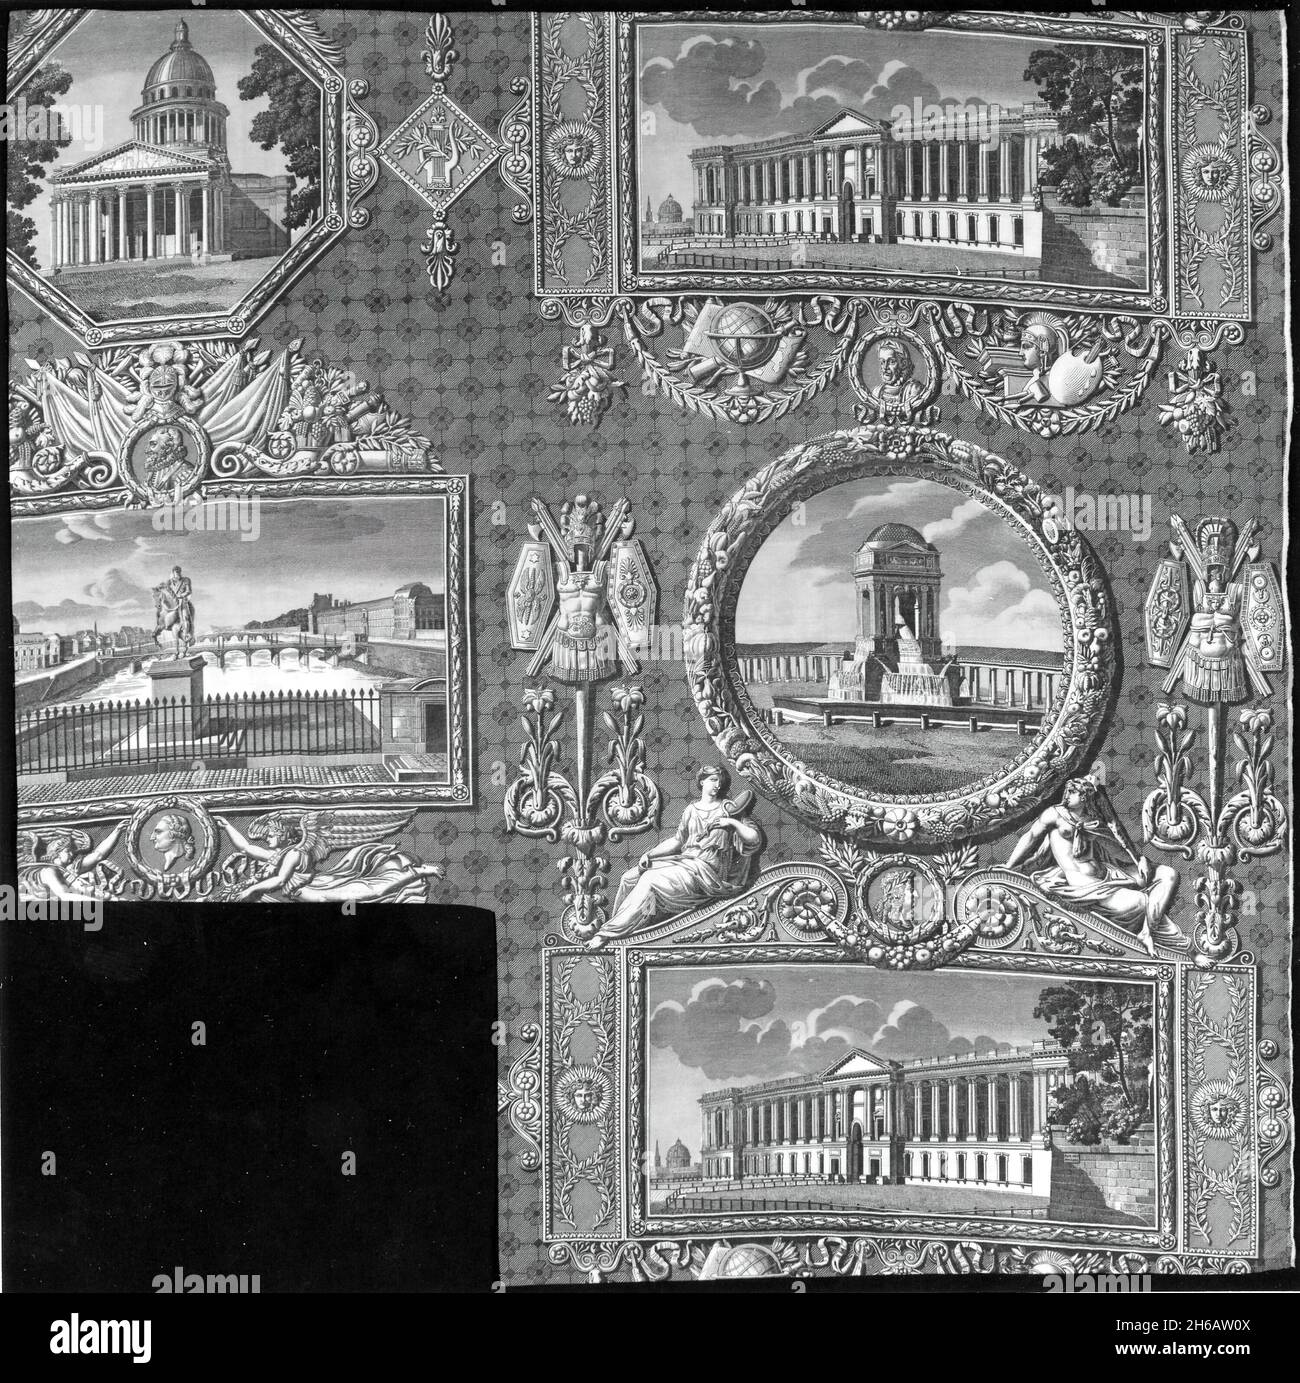 Les Monuments de Paris (The Monuments of Paris) (Furnishing Fabric), France, 1816/18. Designed by Hippolyte Lebas, engraved by Nicolas Auguste Leisnier, manufactured by Christophe Philippe Oberkampf. Stock Photo